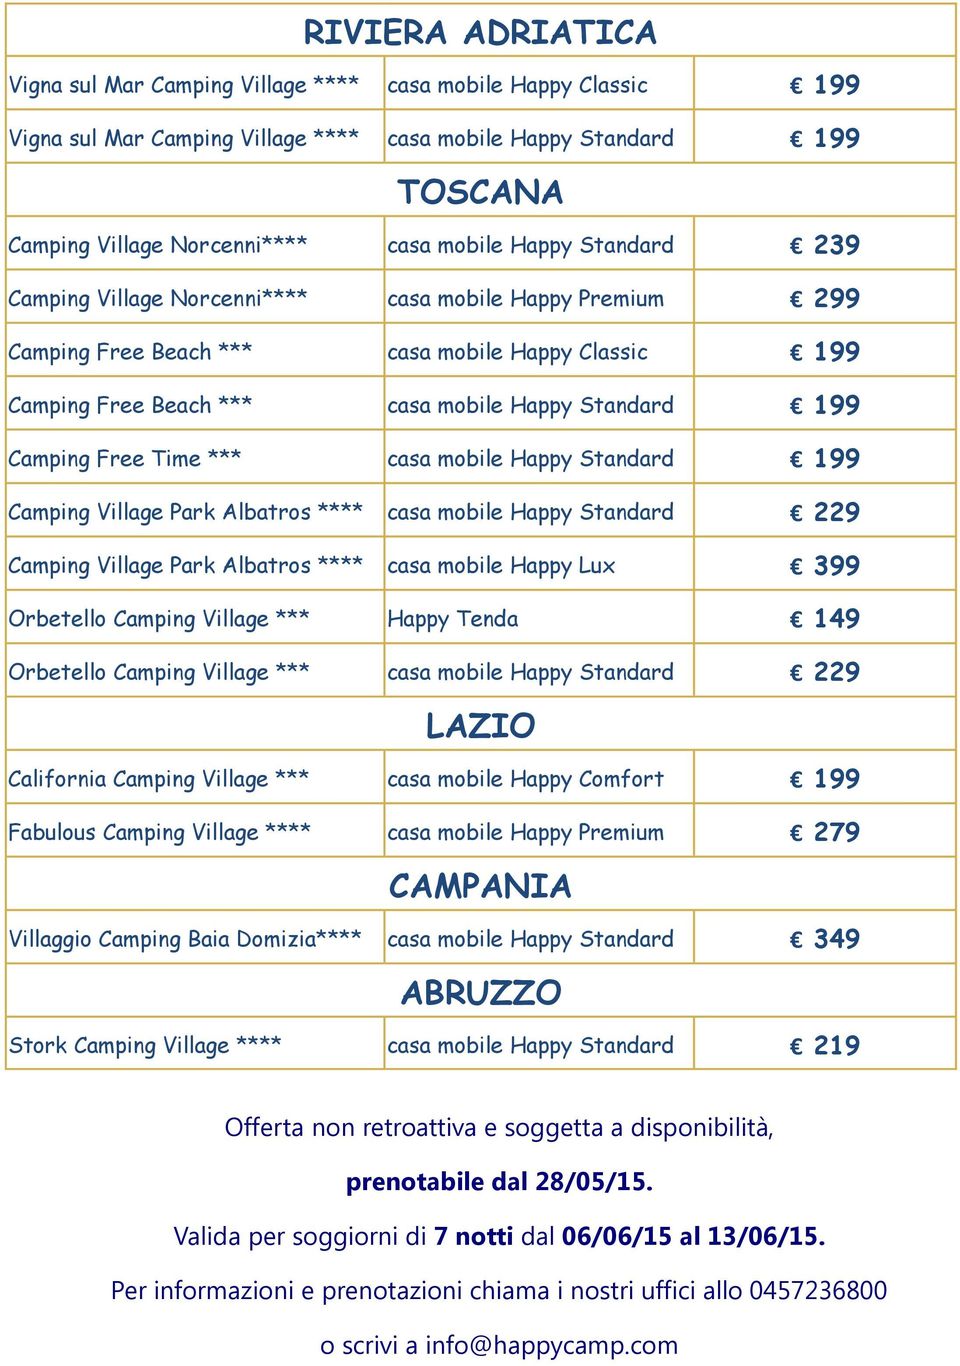 Time *** casa mobile Happy Standard 199 Camping Village Park Albatros **** casa mobile Happy Standard 229 Camping Village Park Albatros **** casa mobile Happy Lux 399 Orbetello Camping Village ***